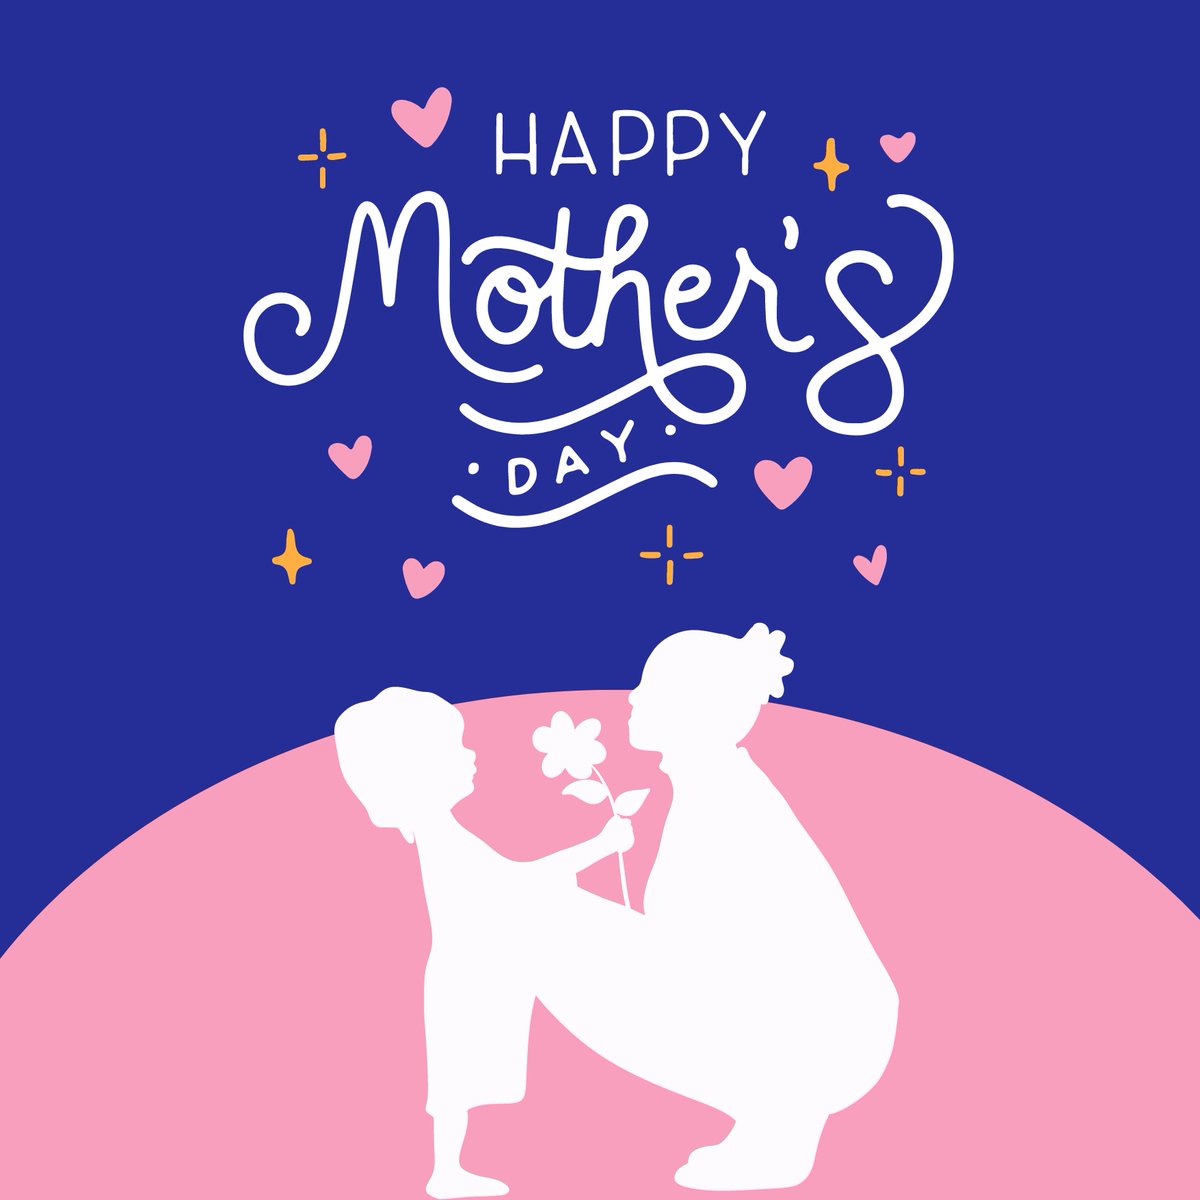 Happy Mother's Day to all the incredible moms! It's the hardest, sometimes thankless, yet most rewarding job in the world. Your love and hard work makes all the difference in the world to the ones who love you the most. We hope you enjoy this day. You totally deserve it!! #ha...